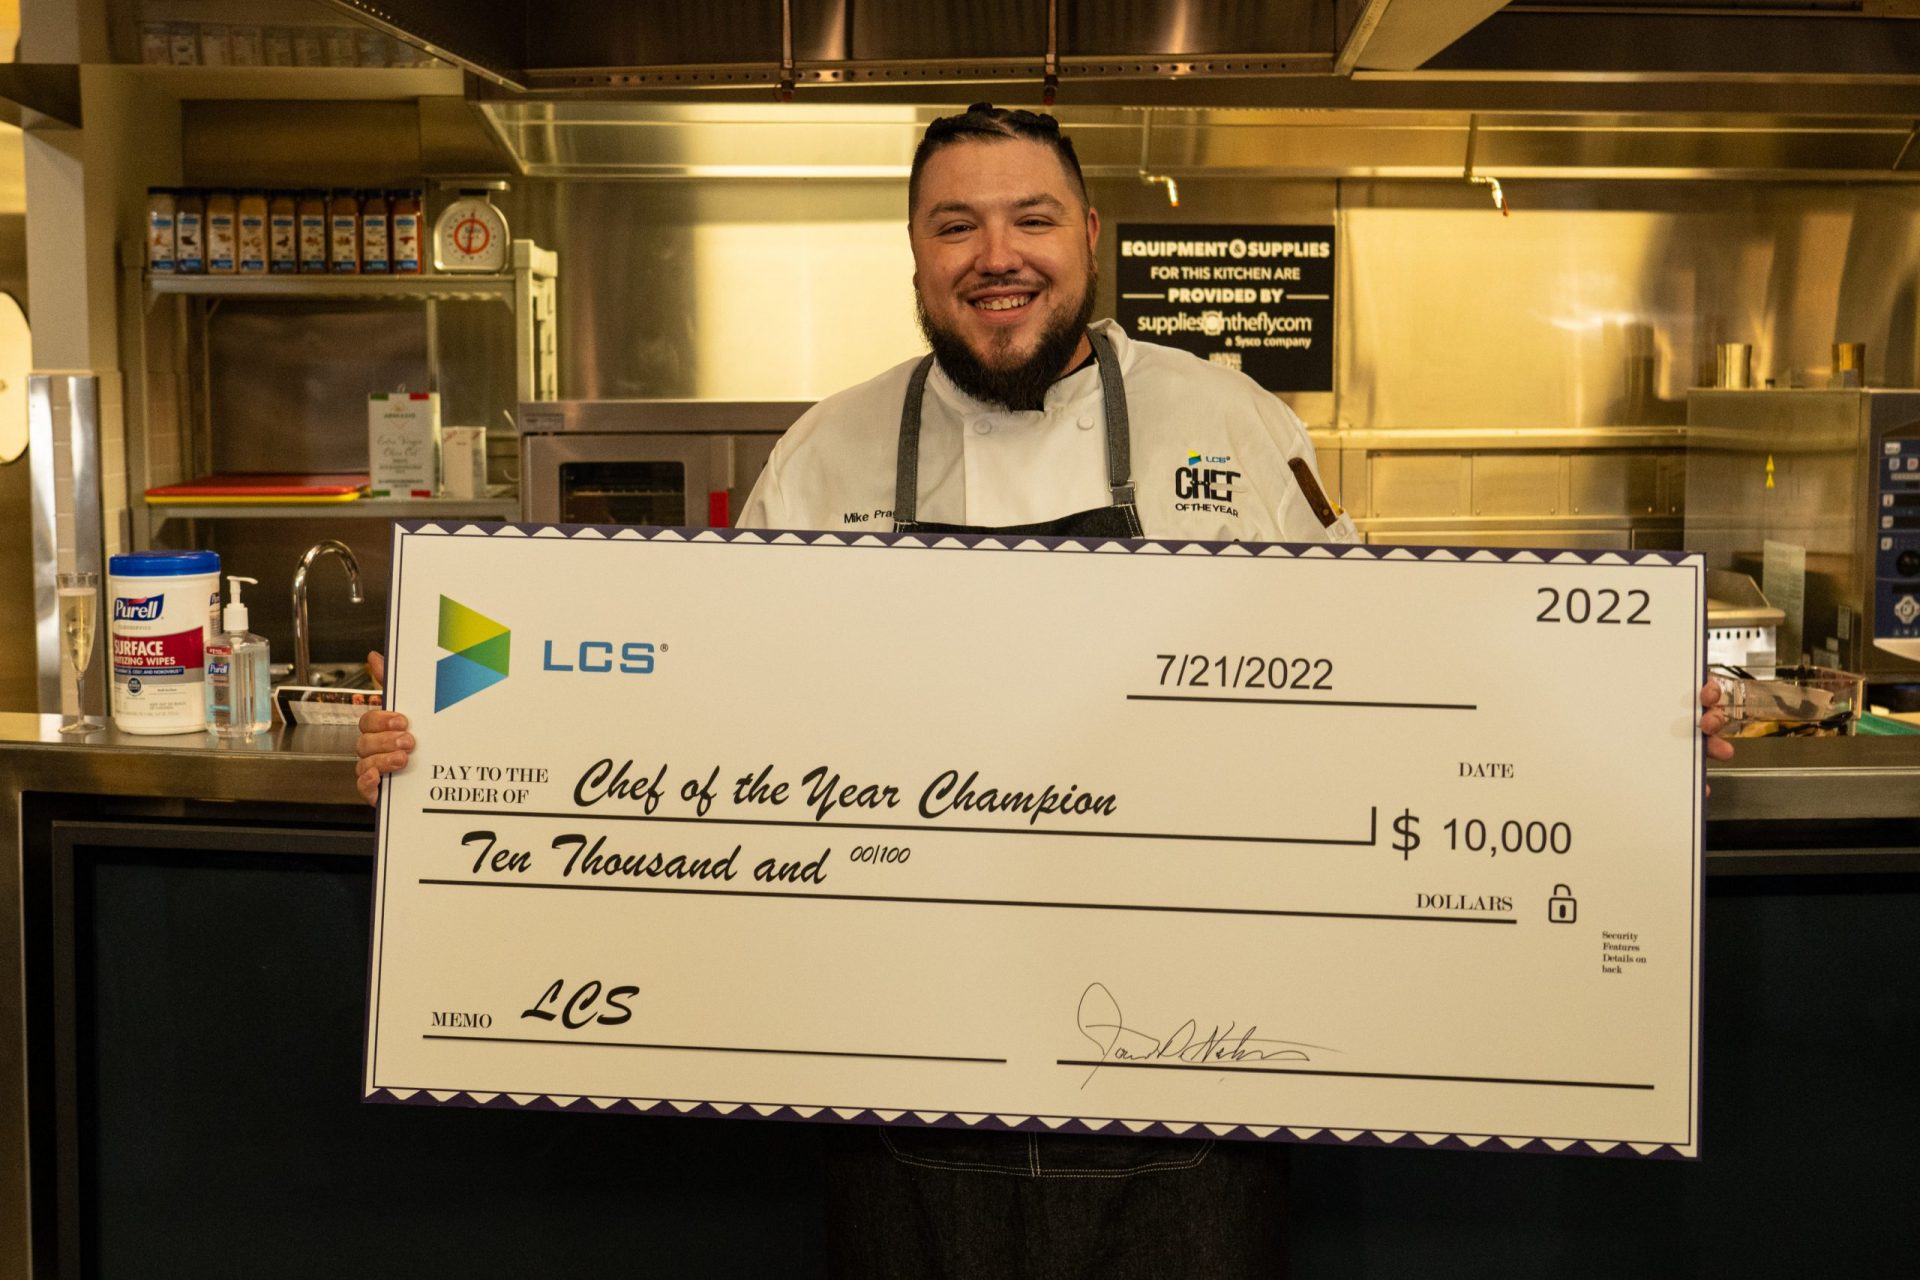 Chef of the year award check of $10,000